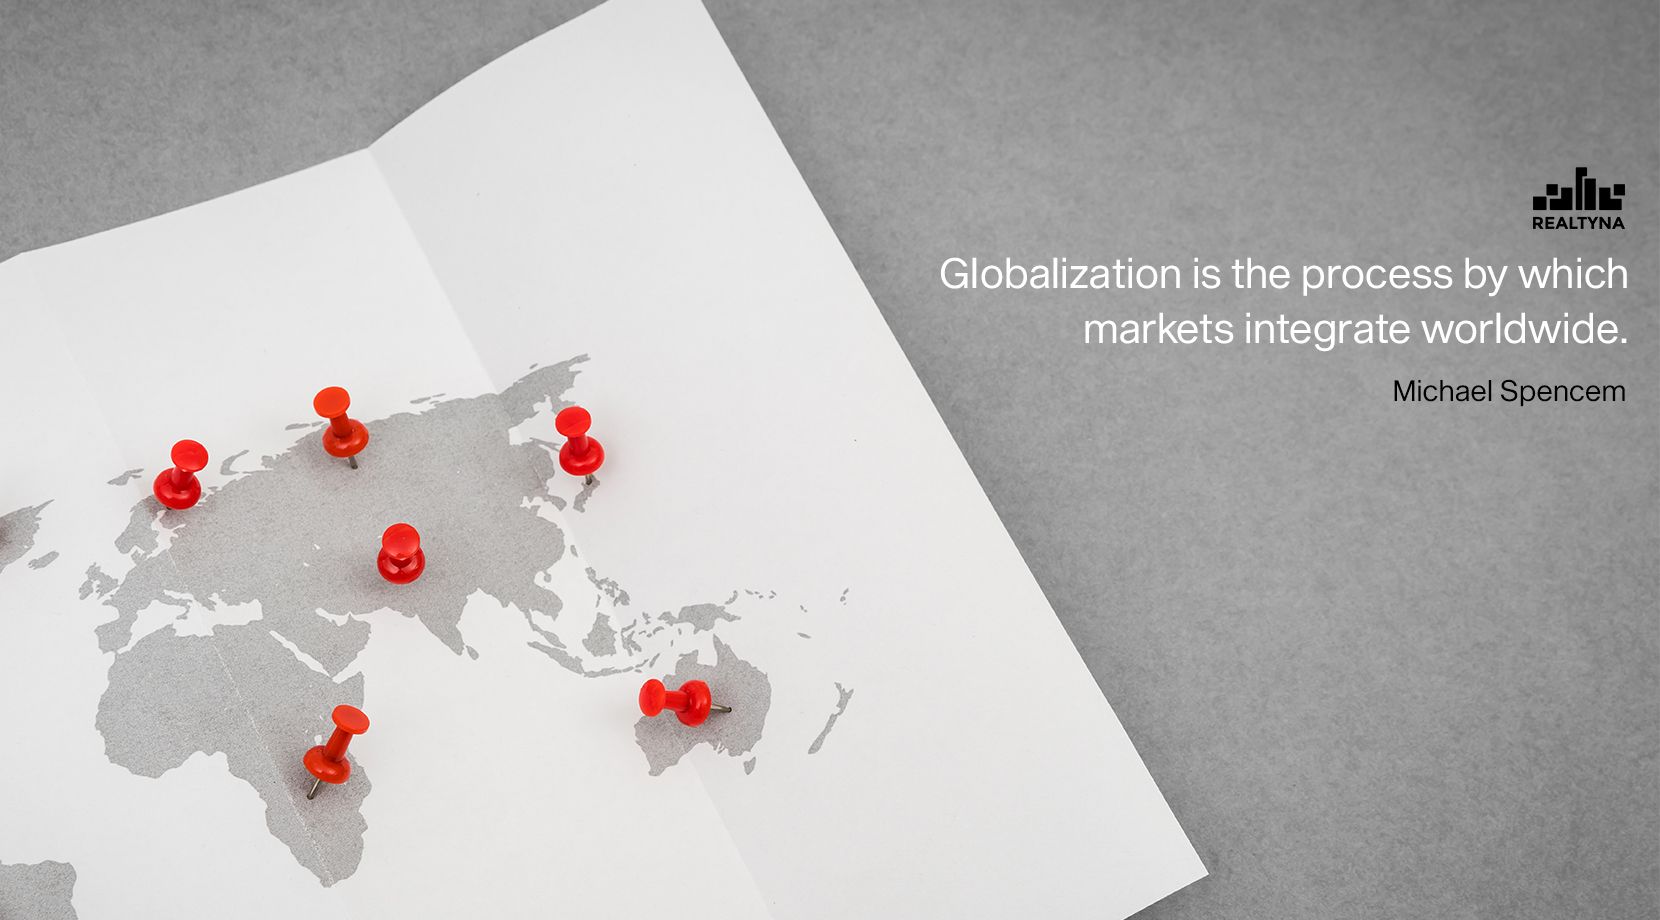 Globalization is the process by which markets integrate worldwide. Michael Spence